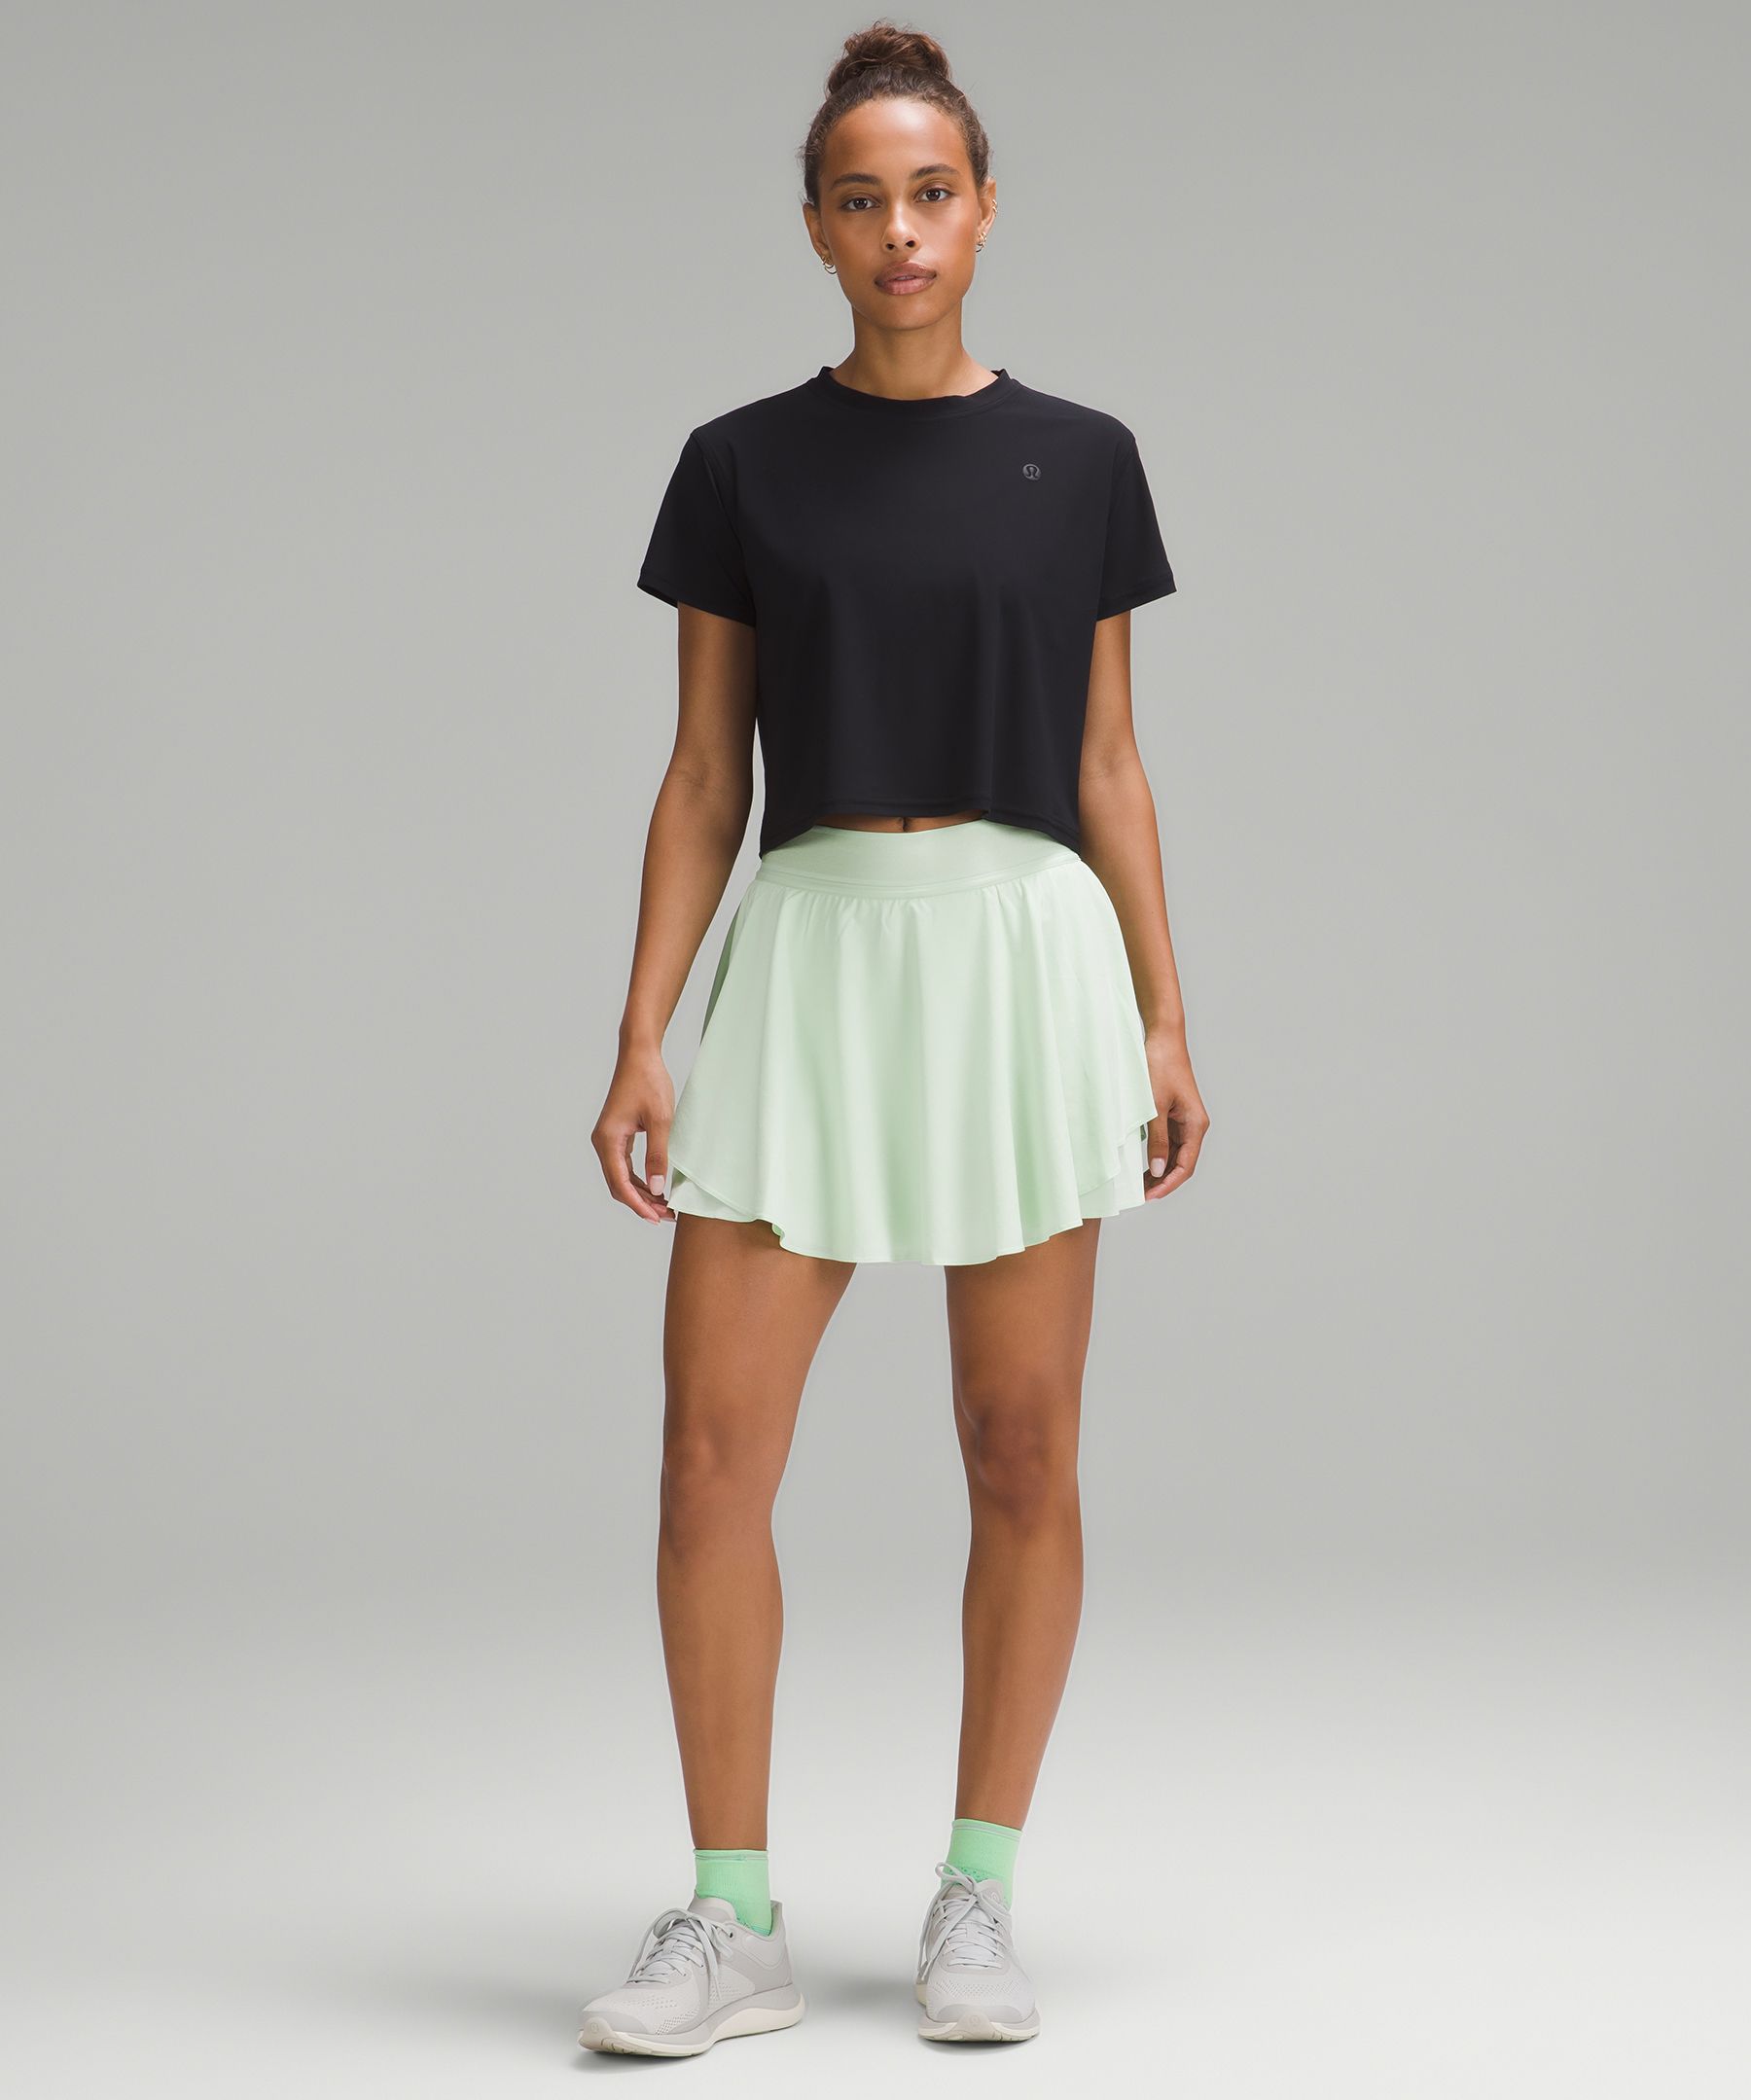 Court Rival high-rise stretch recycled-Swift tennis skirt